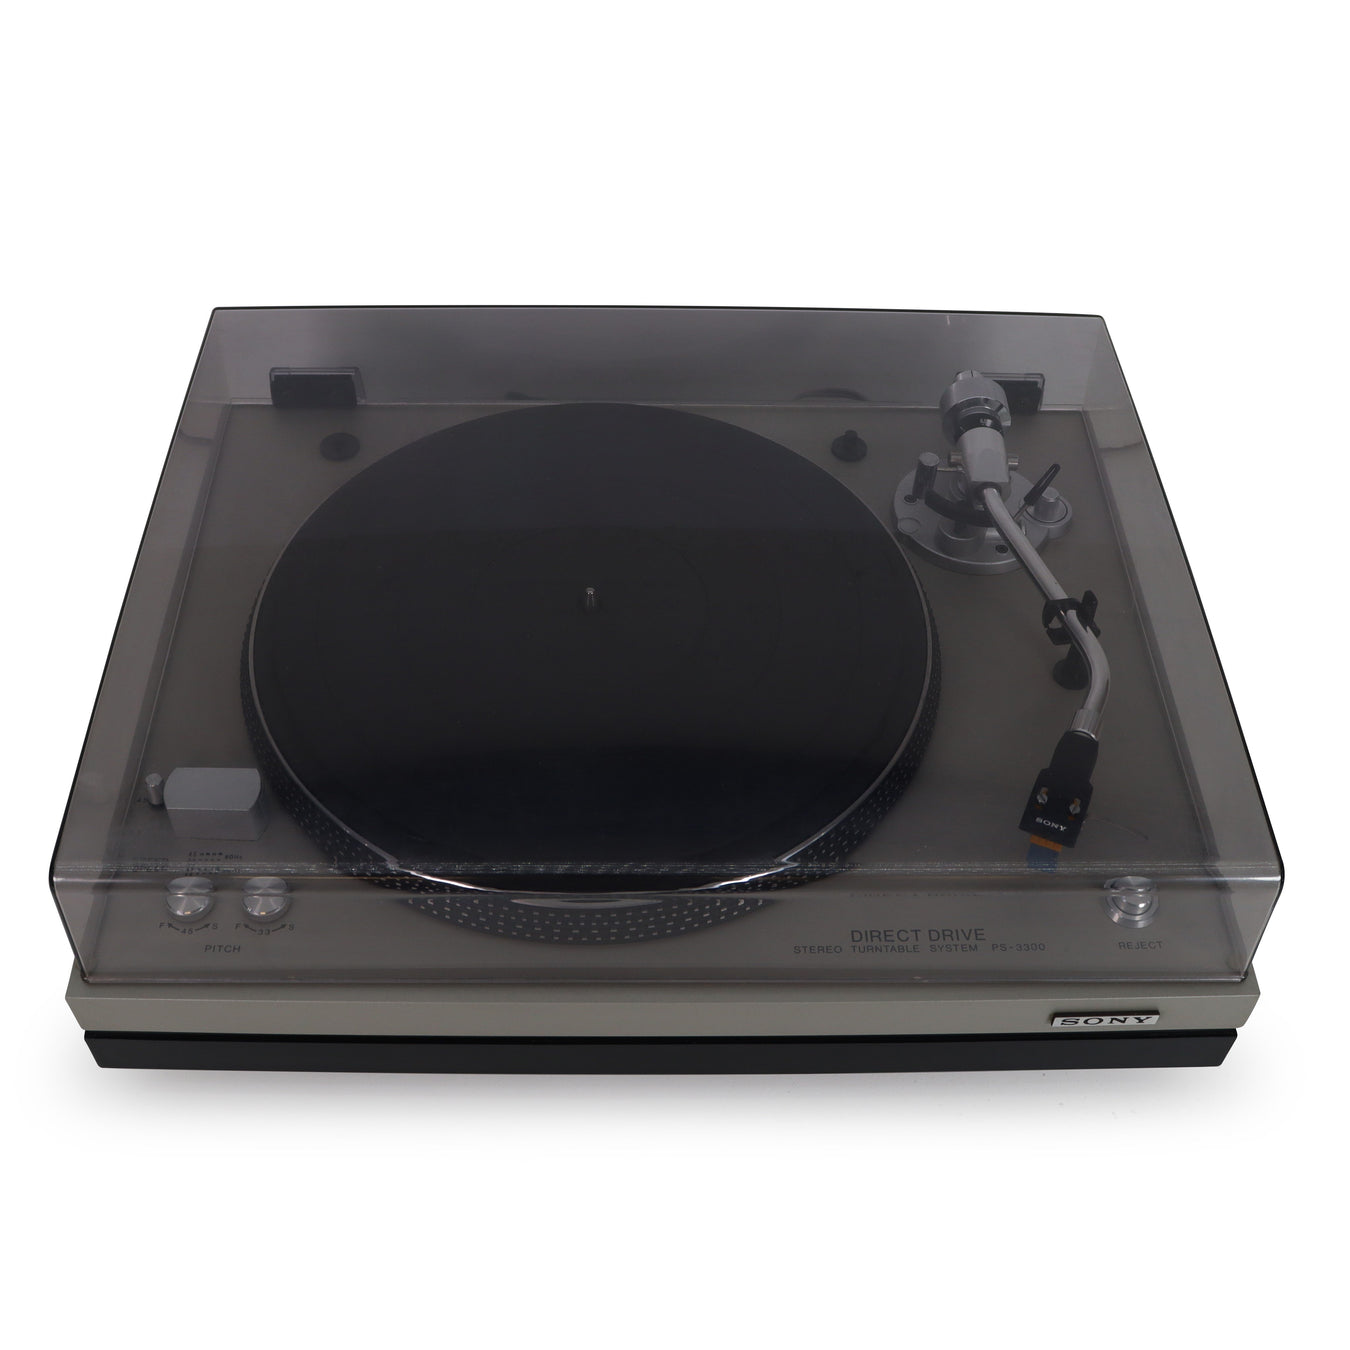 Record Player Turntables Direct Drive Linear Tracking 33 45 78 Pitch control home stereo component vintage phonograph system phono pioneer technics